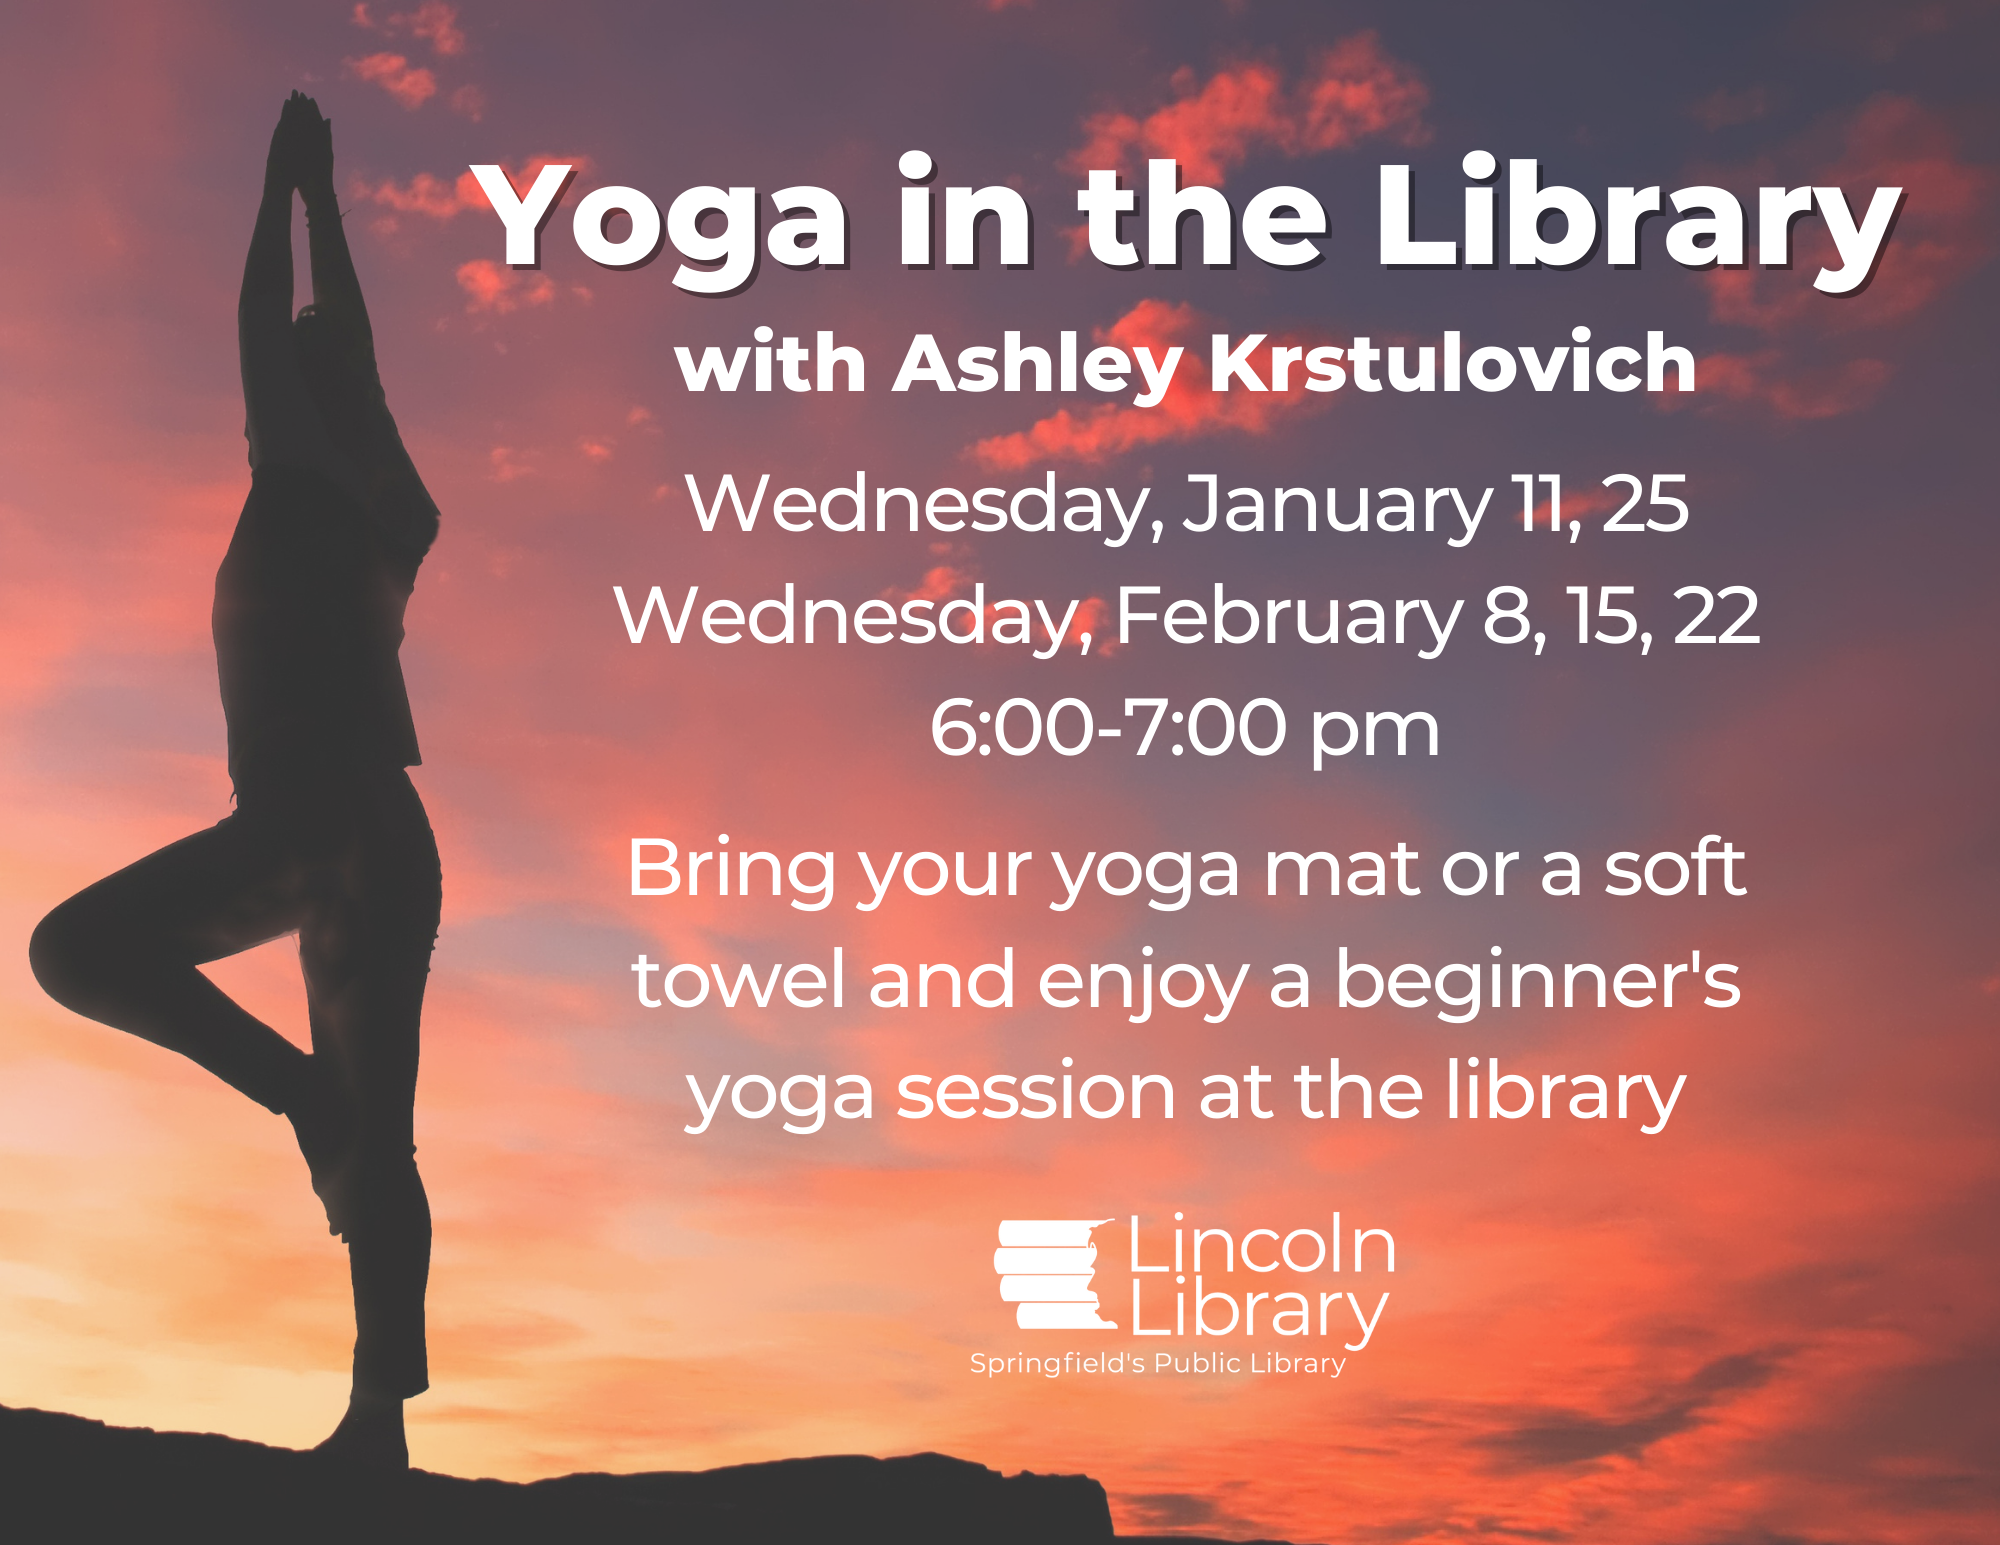 https://www.lincolnlibrary.info/sites/default/files/2022-12/Yoga%20in%20the%20Library_0.png